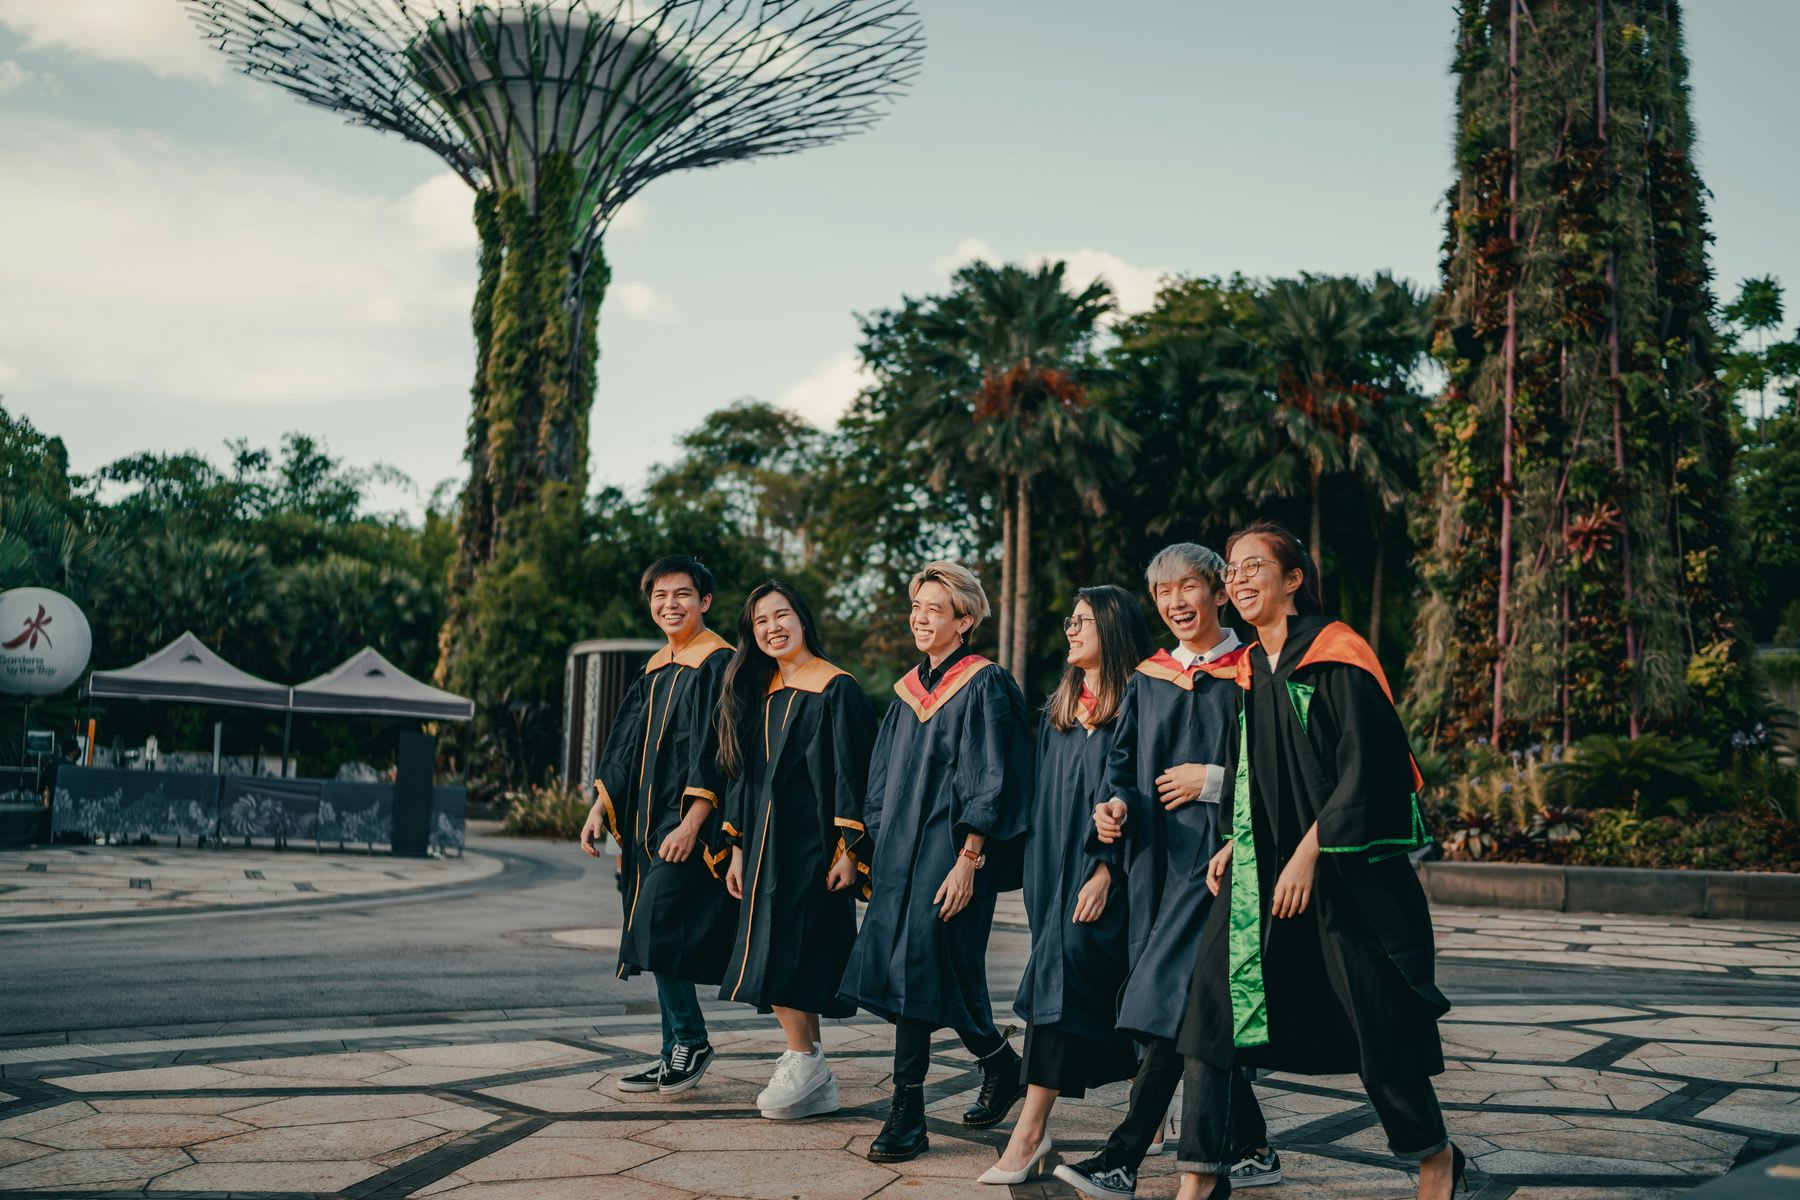 Students wearing graduation robes and caps walking together in campus